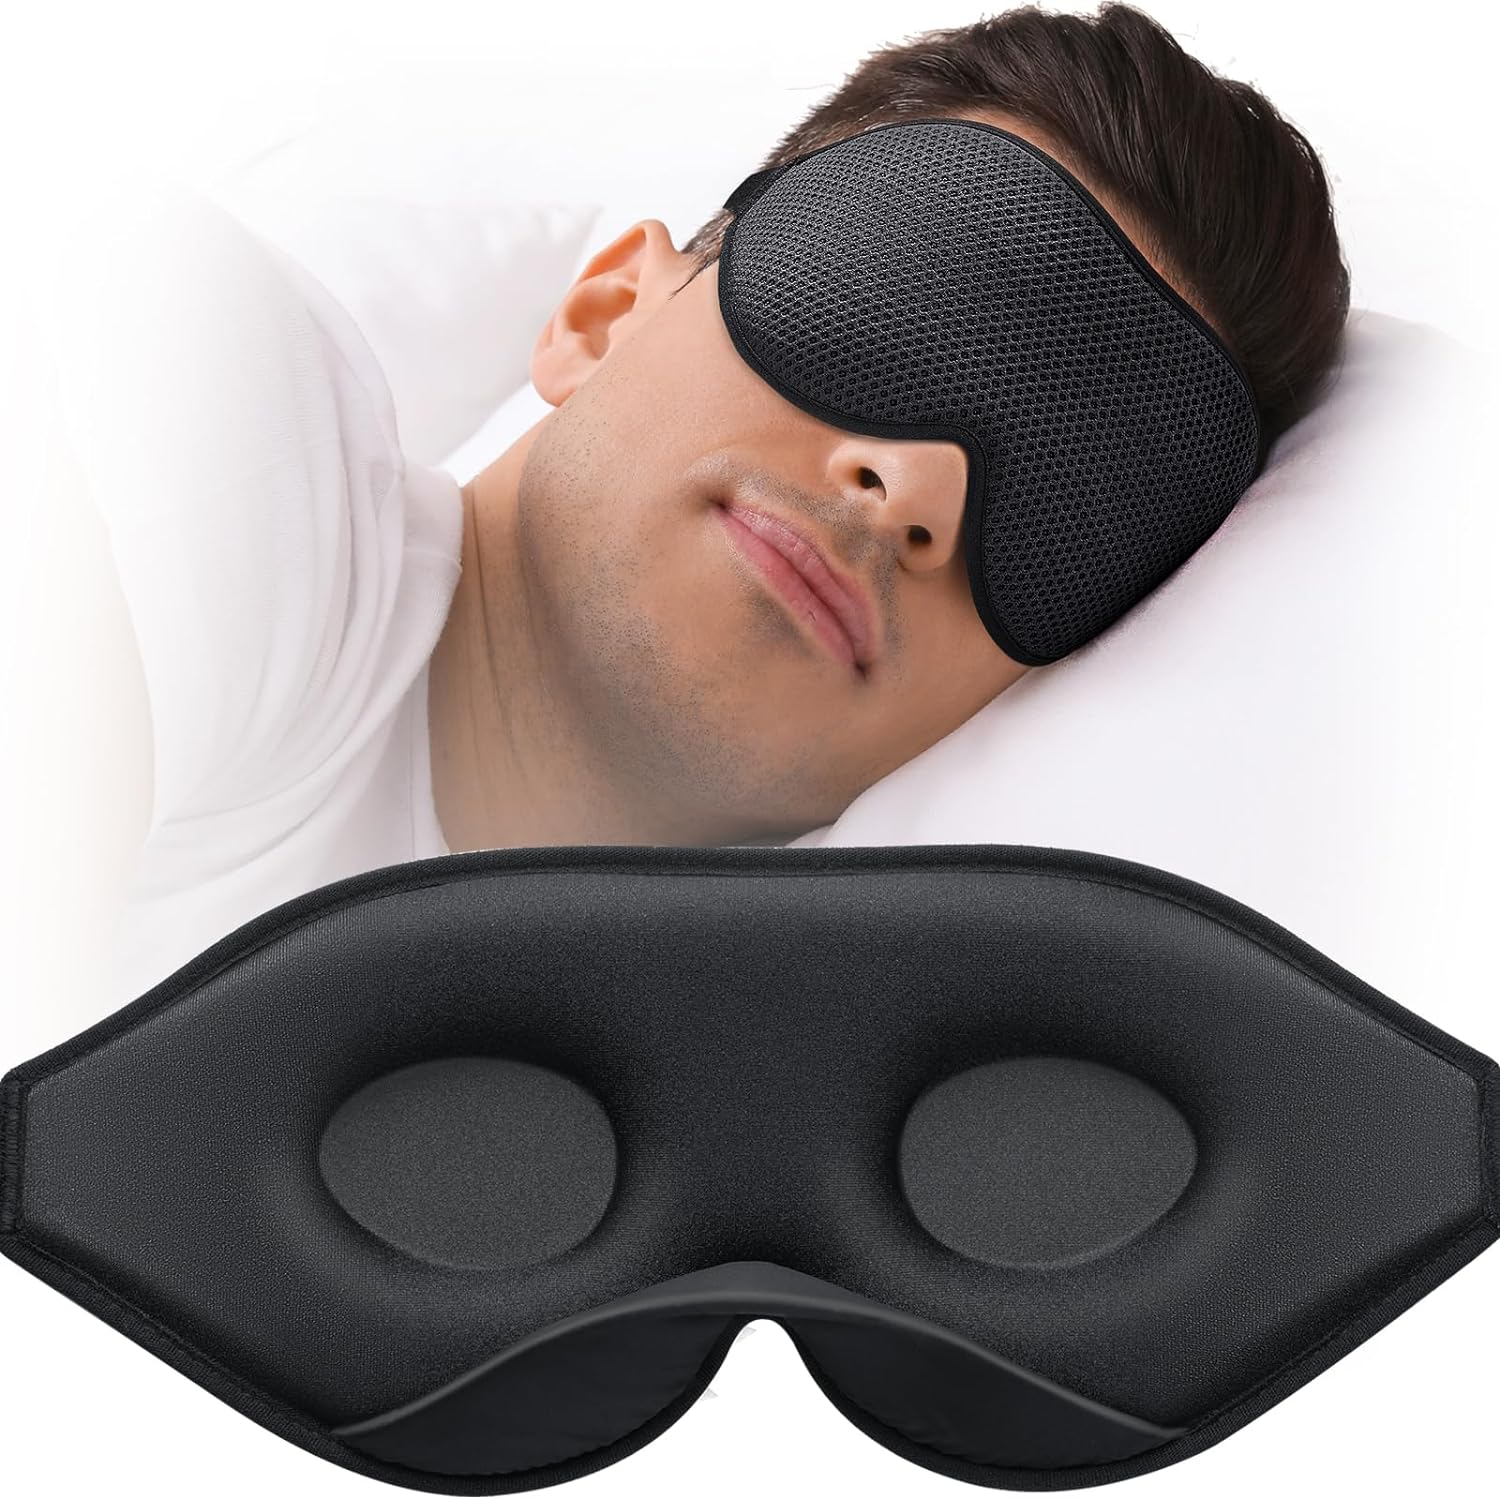 I have two masks, this one I prefer, the other is a neoprene only. I travel a lot and light is an issue in falling asleep. I have also developed very serious dry eye. My doctor told me to start sleeping with a mask after putting drops or ointment in my eyes at night. Within 2 weeks of sleeping with this mask, my dry eyes are cleared up for the most part.The mask is soft and actually comforting and soothing when you put it on. There is a silken material around the nose area which is very soft. Th